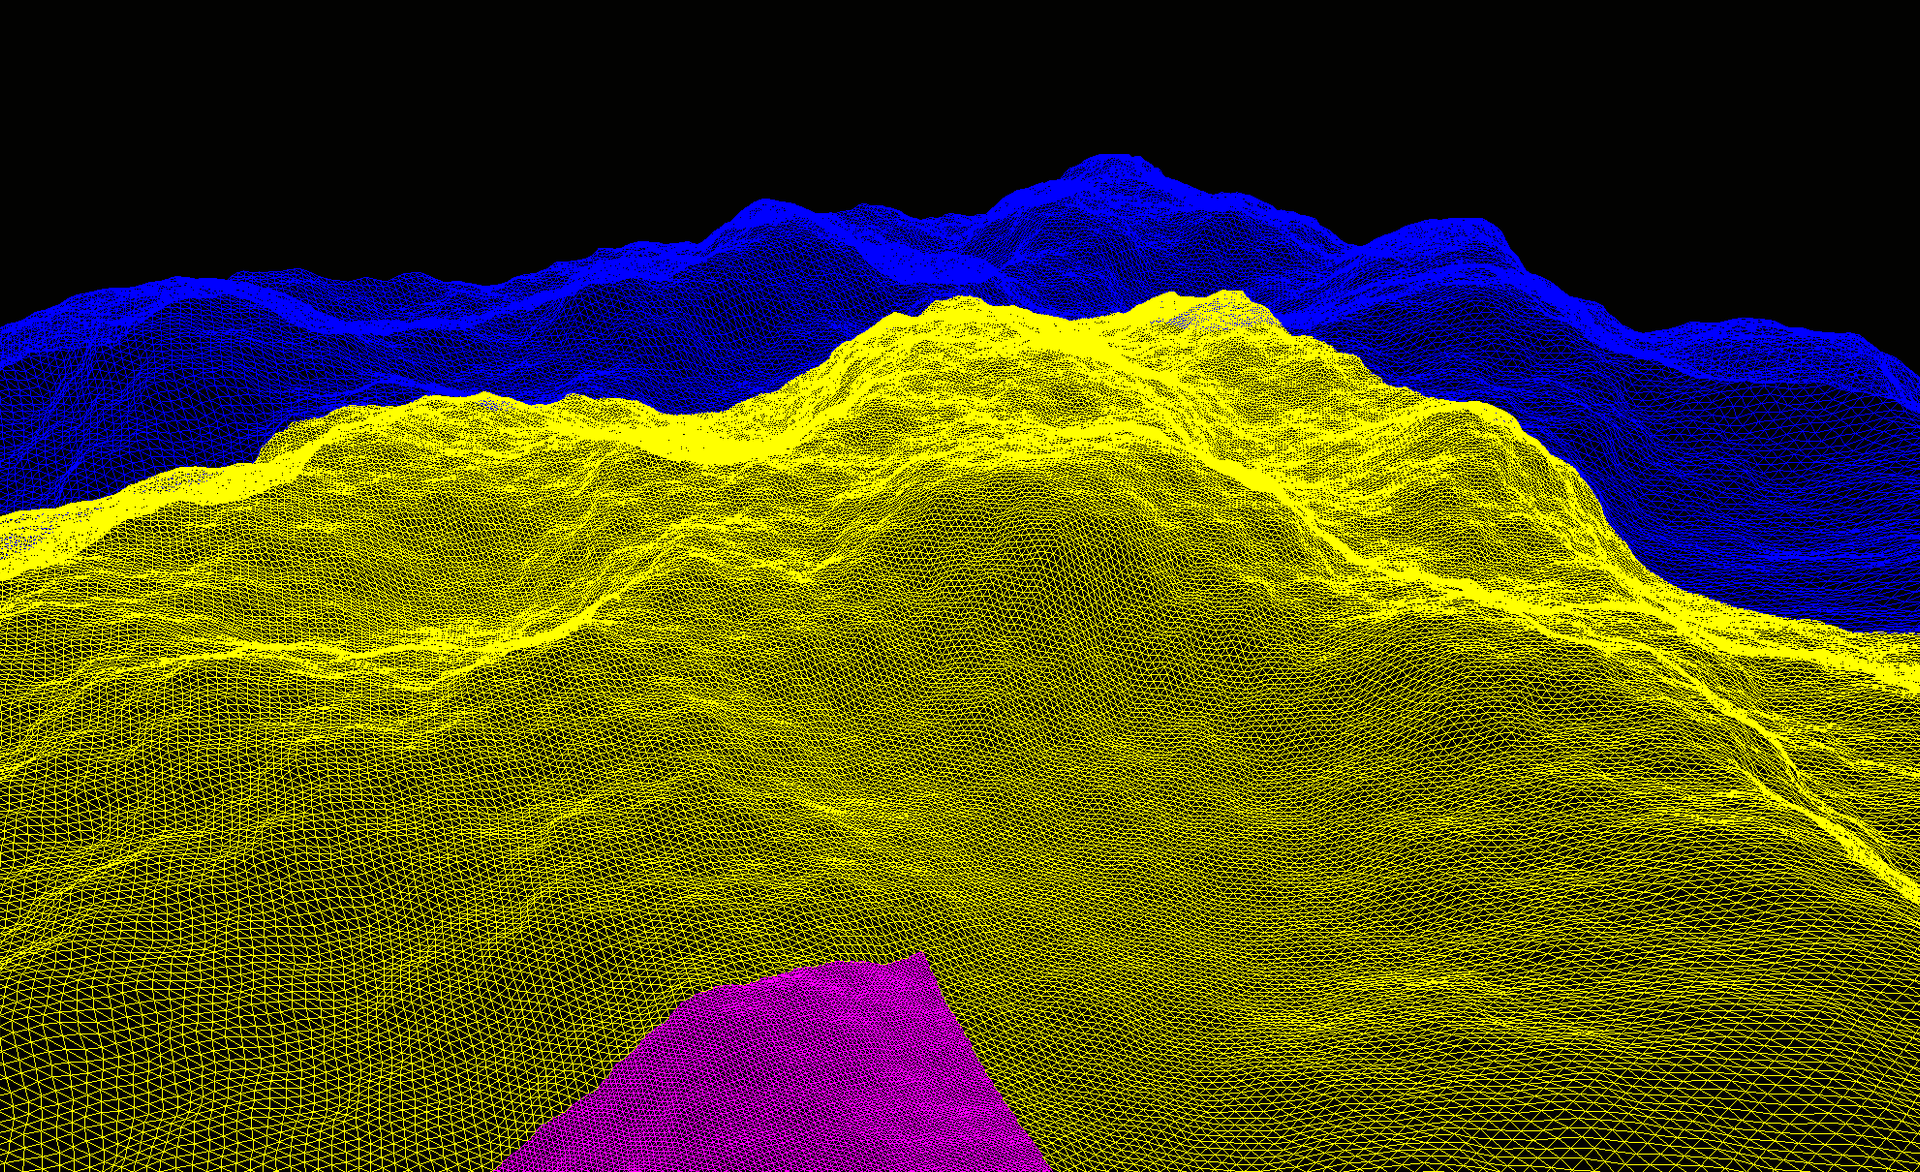 A screenshot of a debug view of the LOD terrain system.  It shows some procedurally generated terrain rendered as a wireframe with different colors representing different levels of detail.